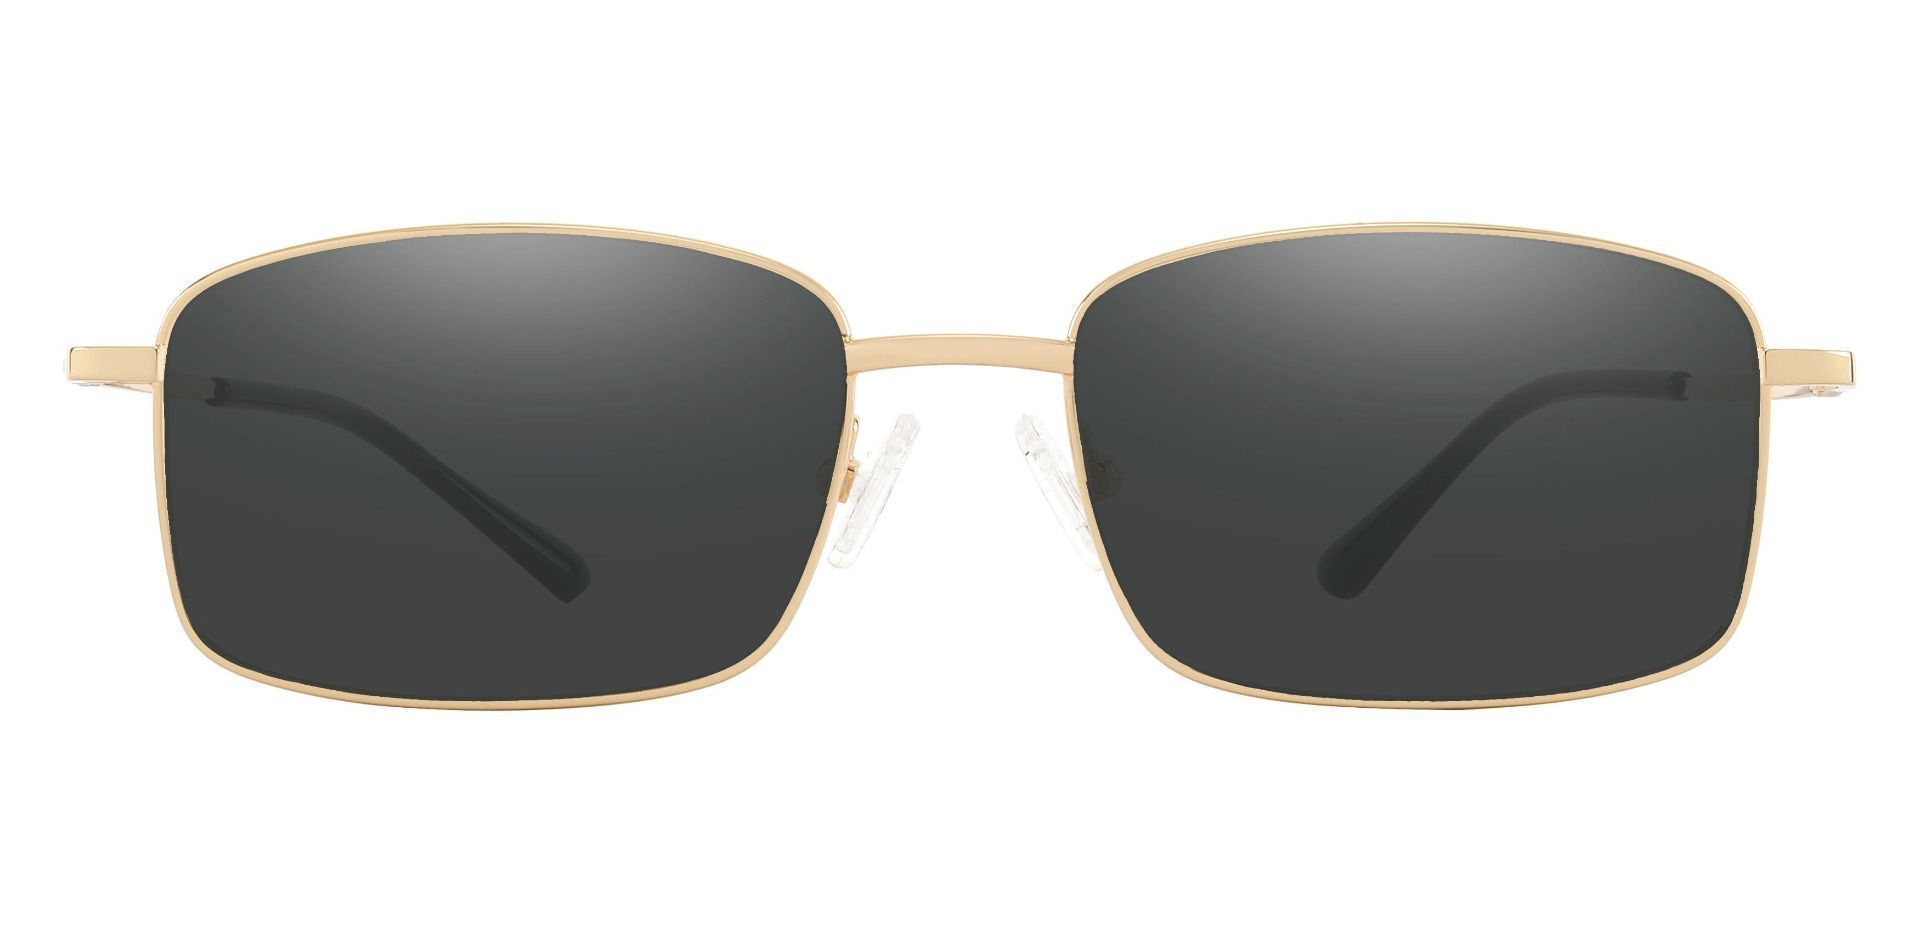 Clyde Rectangle Non-Rx Sunglasses - Gold Frame With Gray Lenses